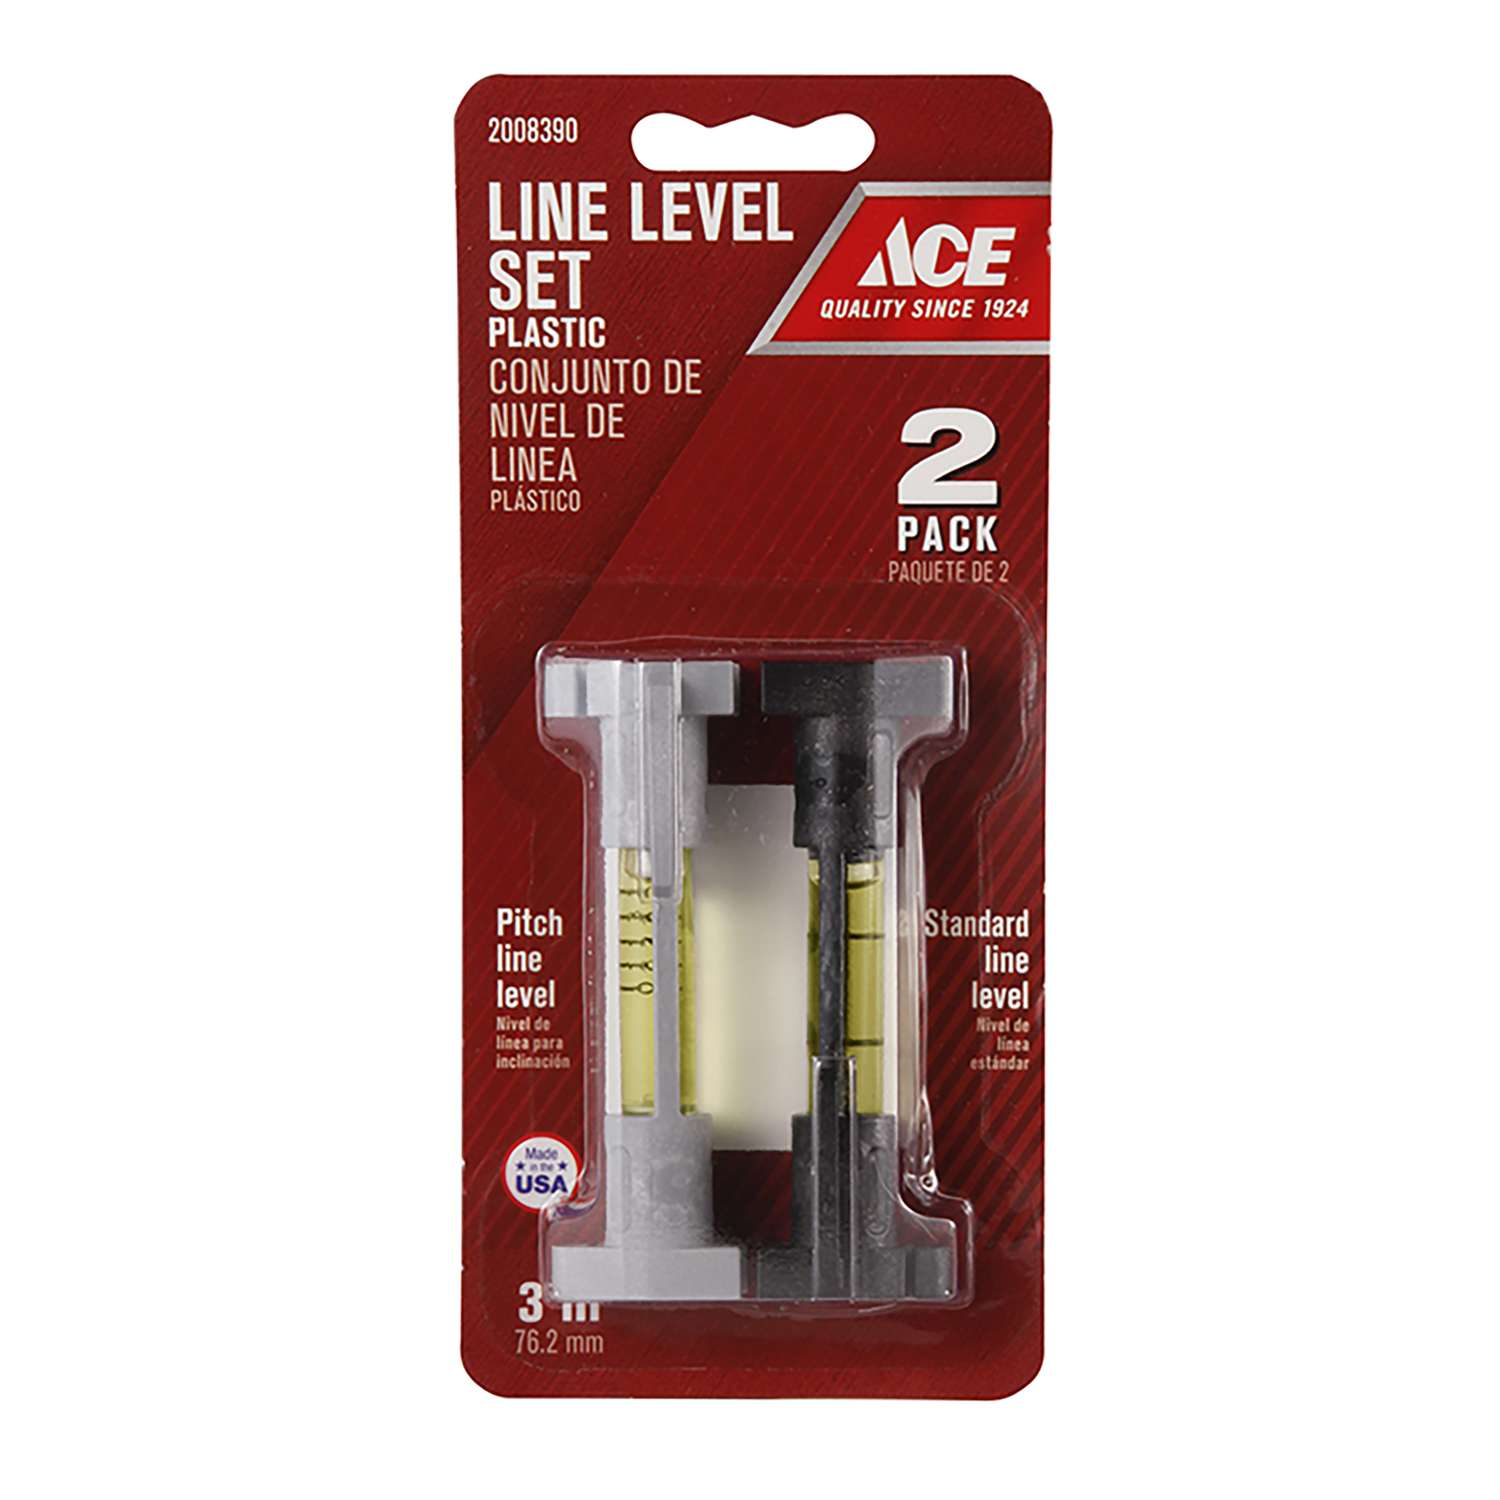 Ace 3 in. Line Level Set 1 Vial 2008390